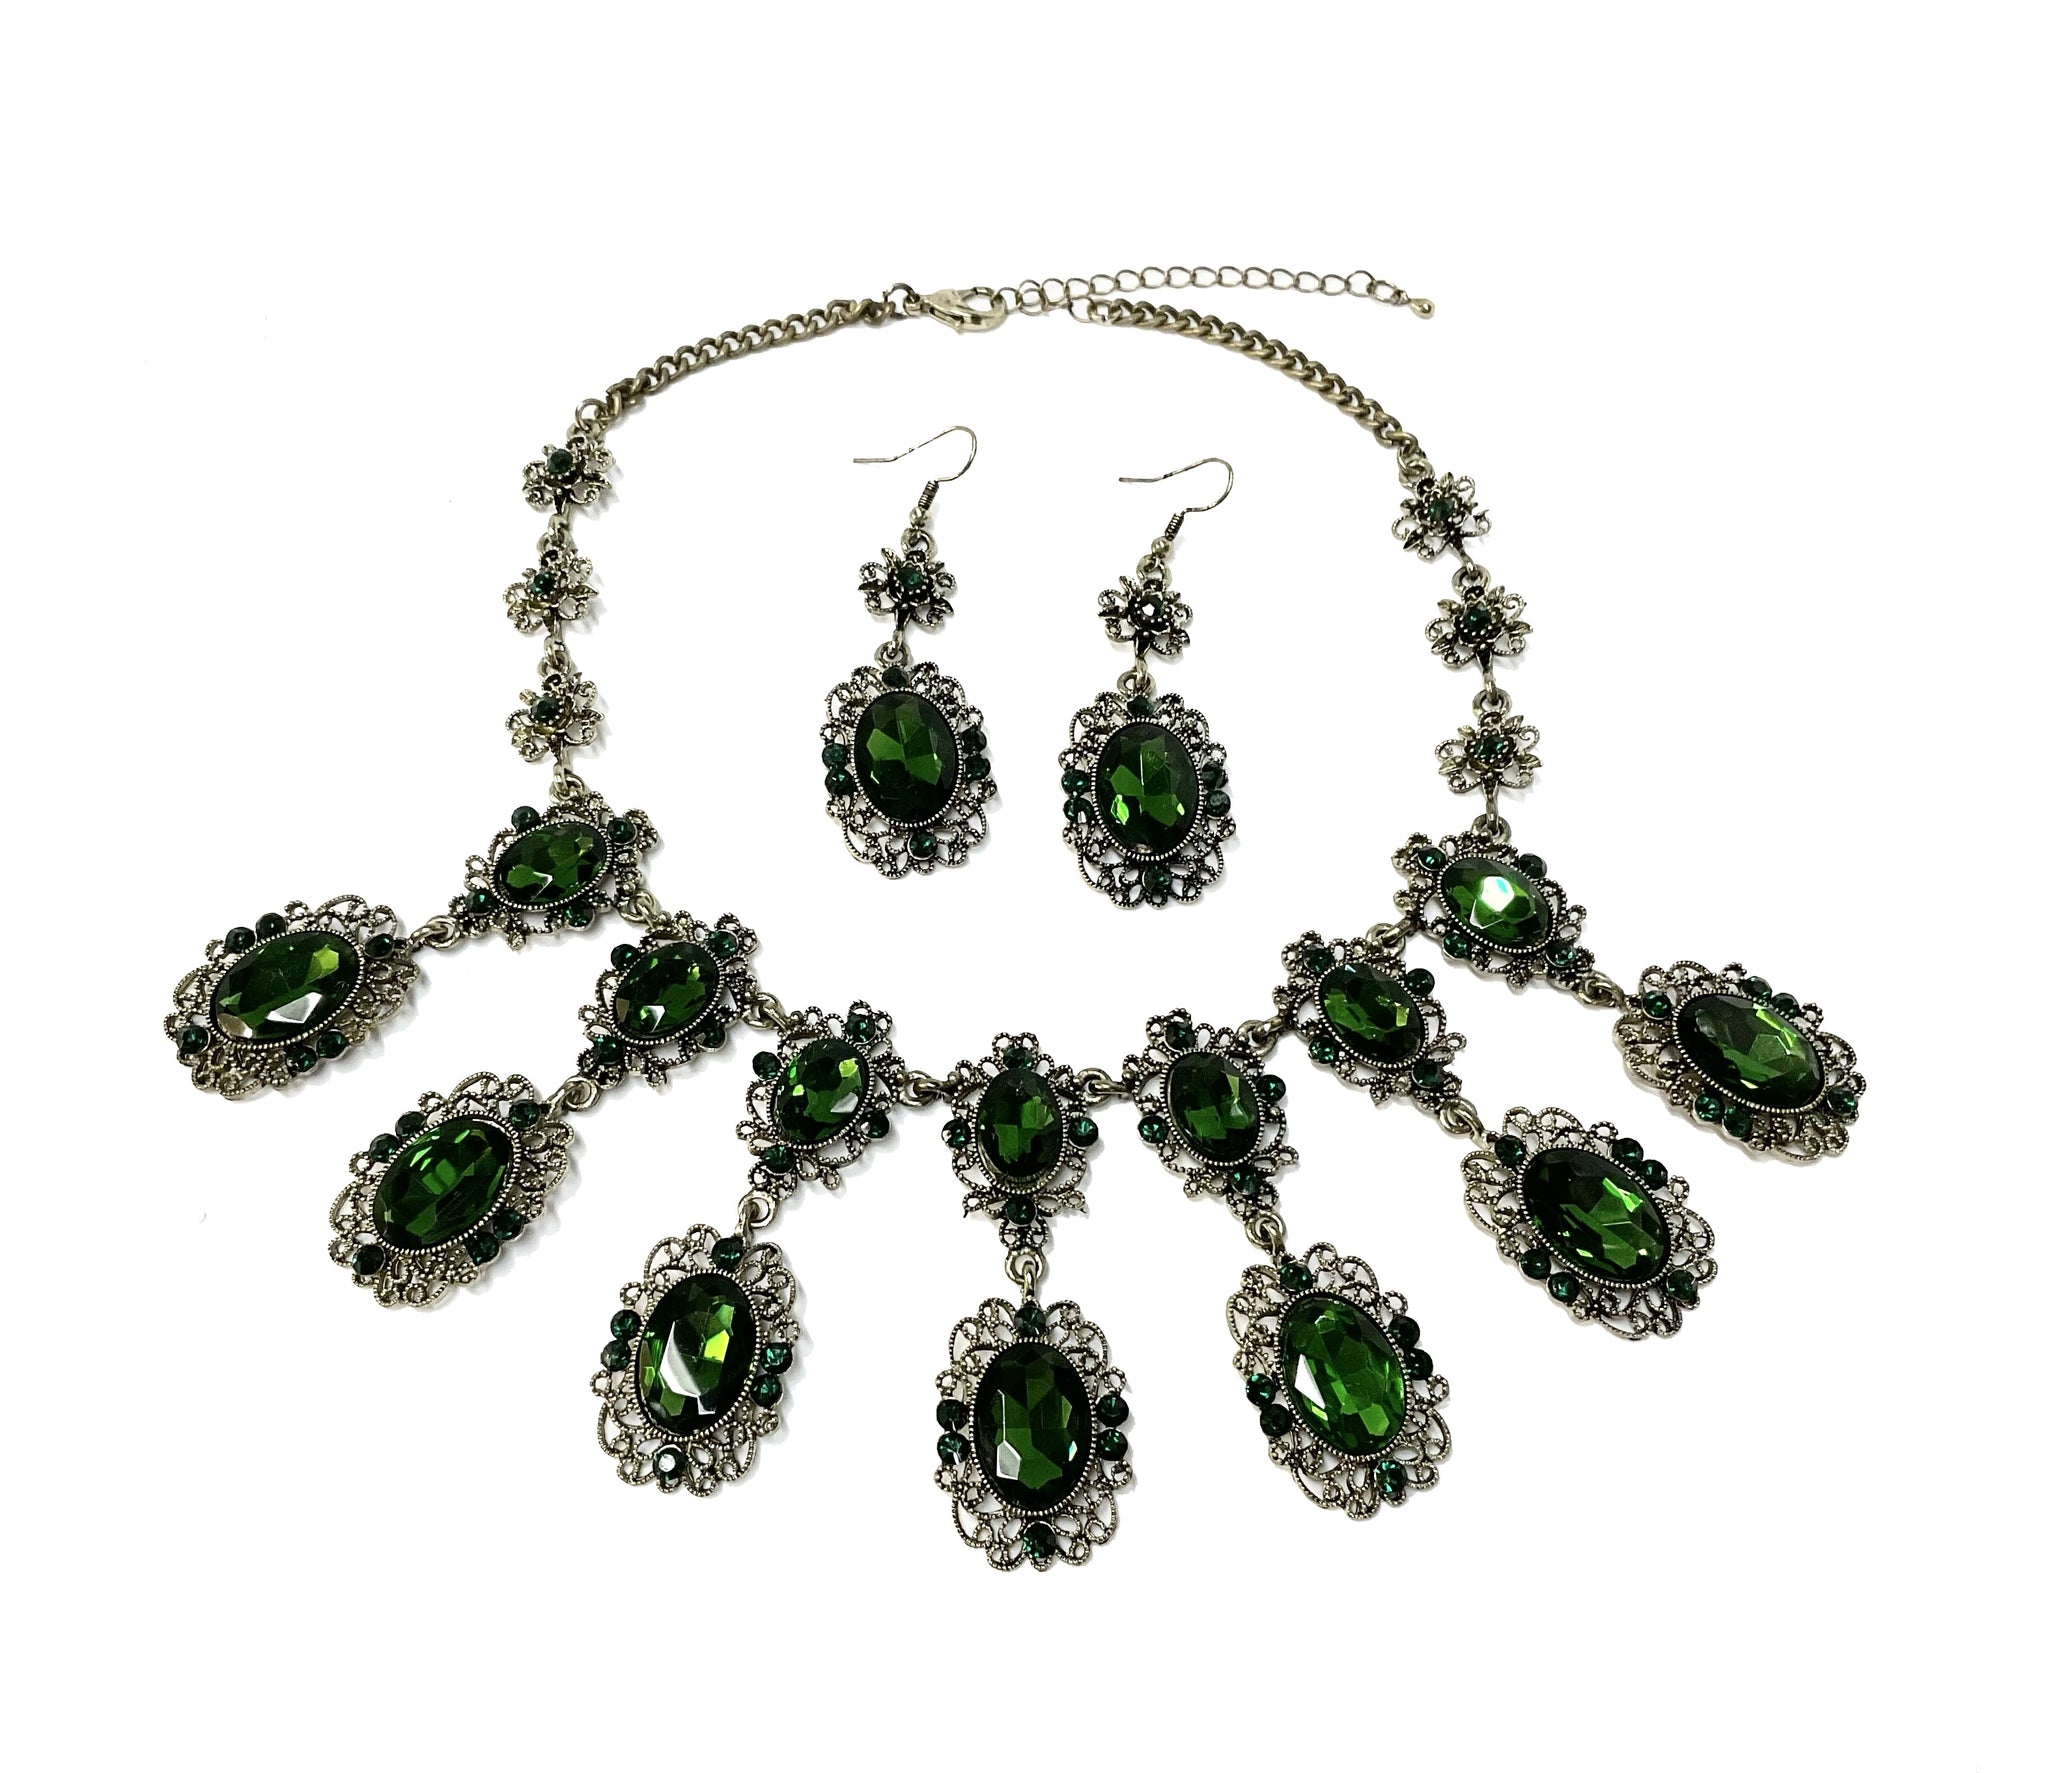 Rhinestone Necklace and Earrings Set#28-11304GN